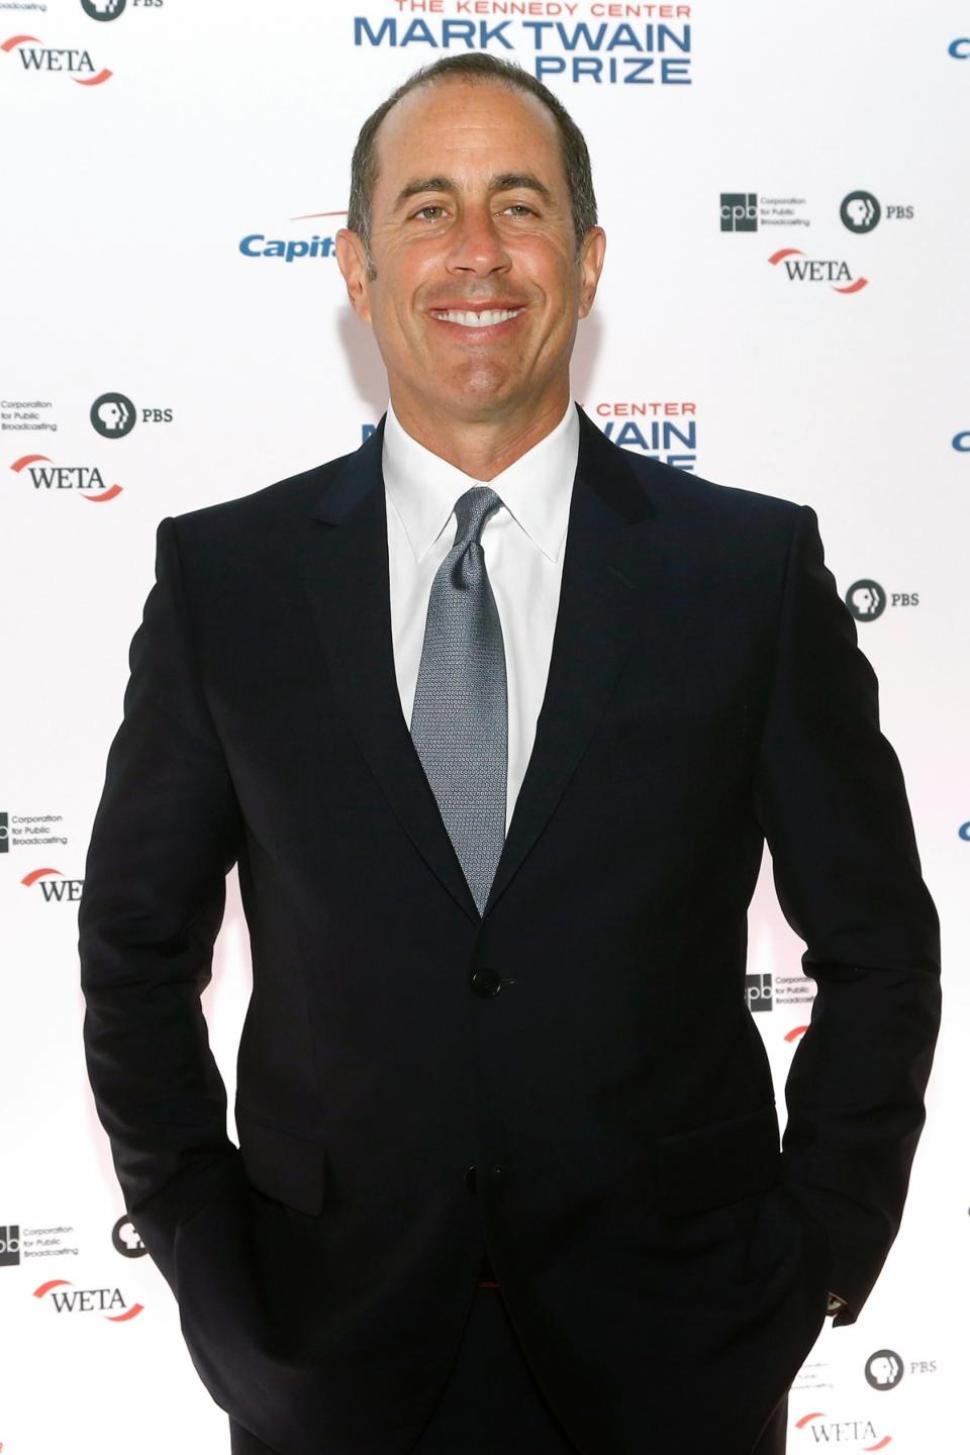 Comedian Jerry Seinfeld sat down with Brian Williams and revealed why he believes he's on the 'autism spectrum.'